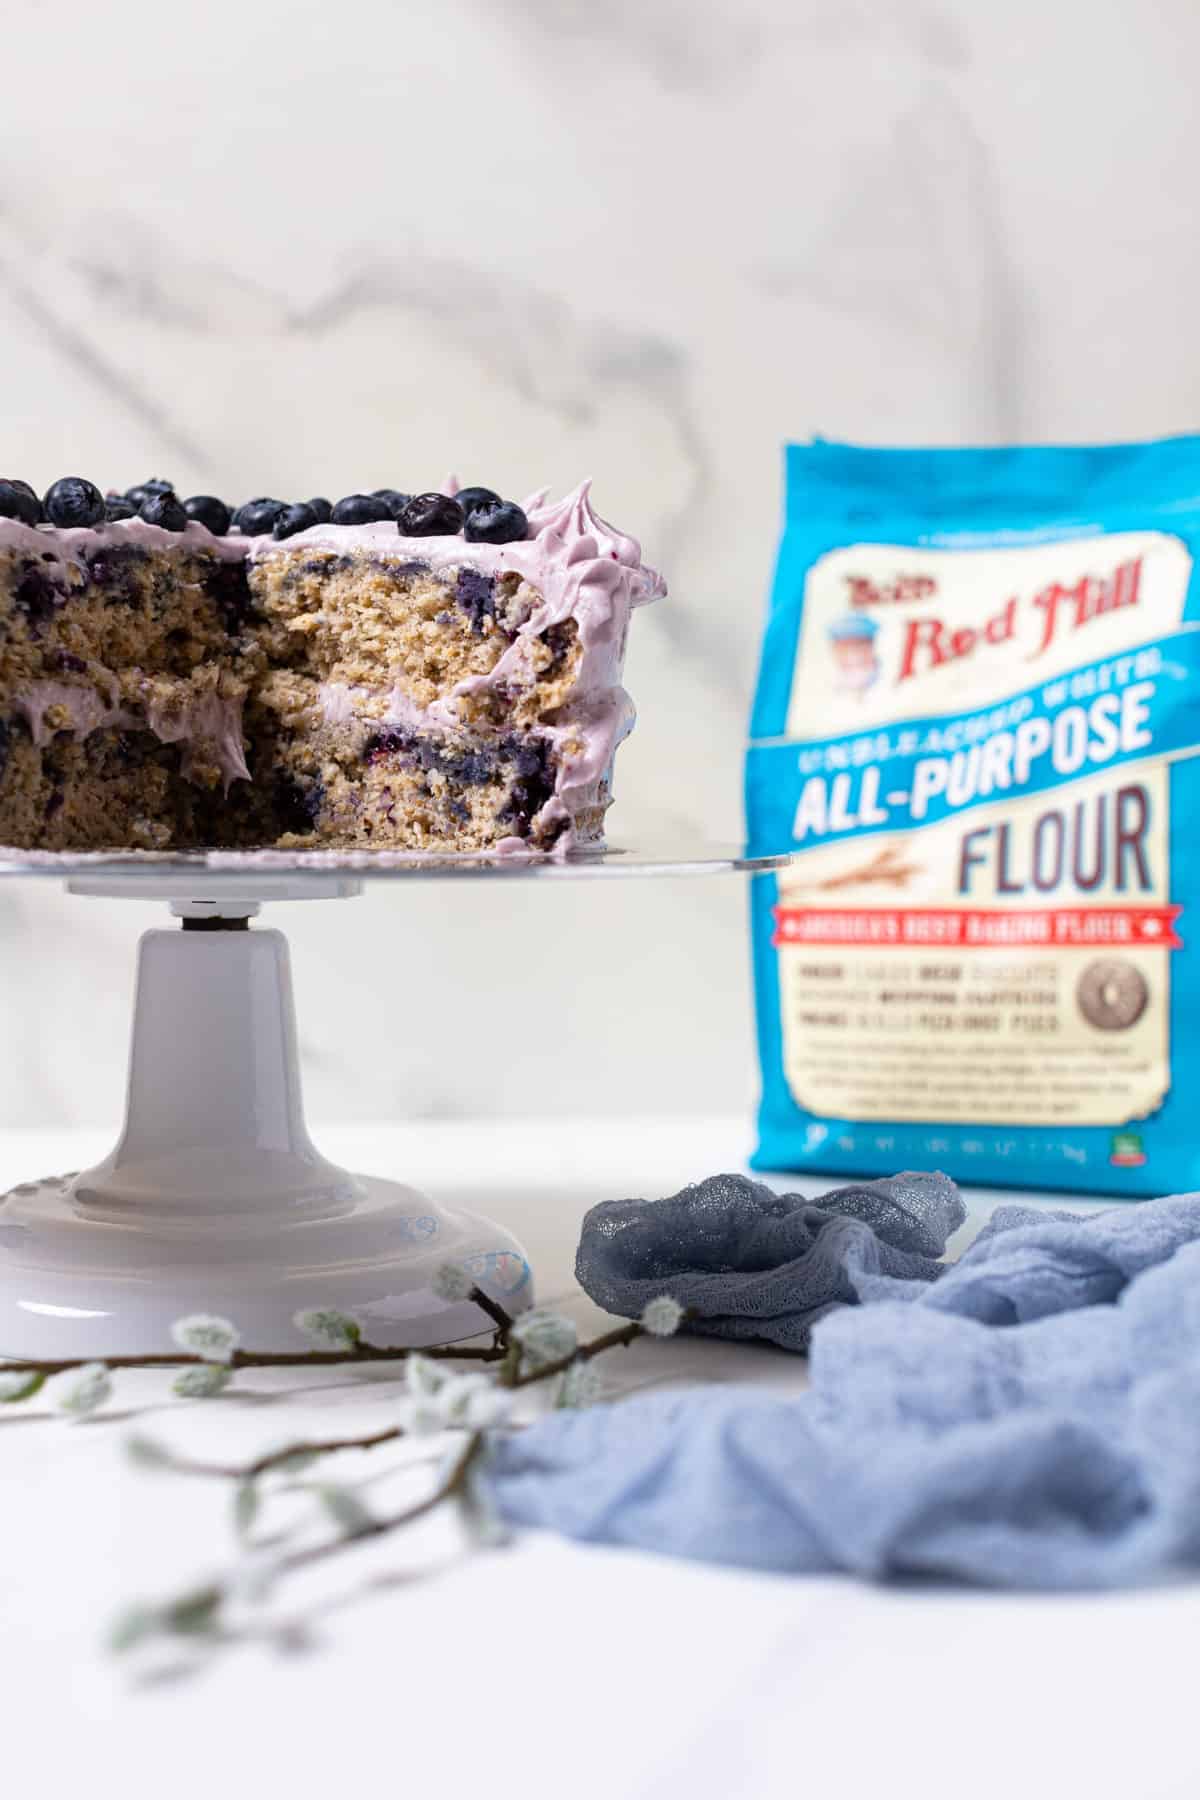 Blueberry Oatmeal Cake + Cream Cheese Frosting